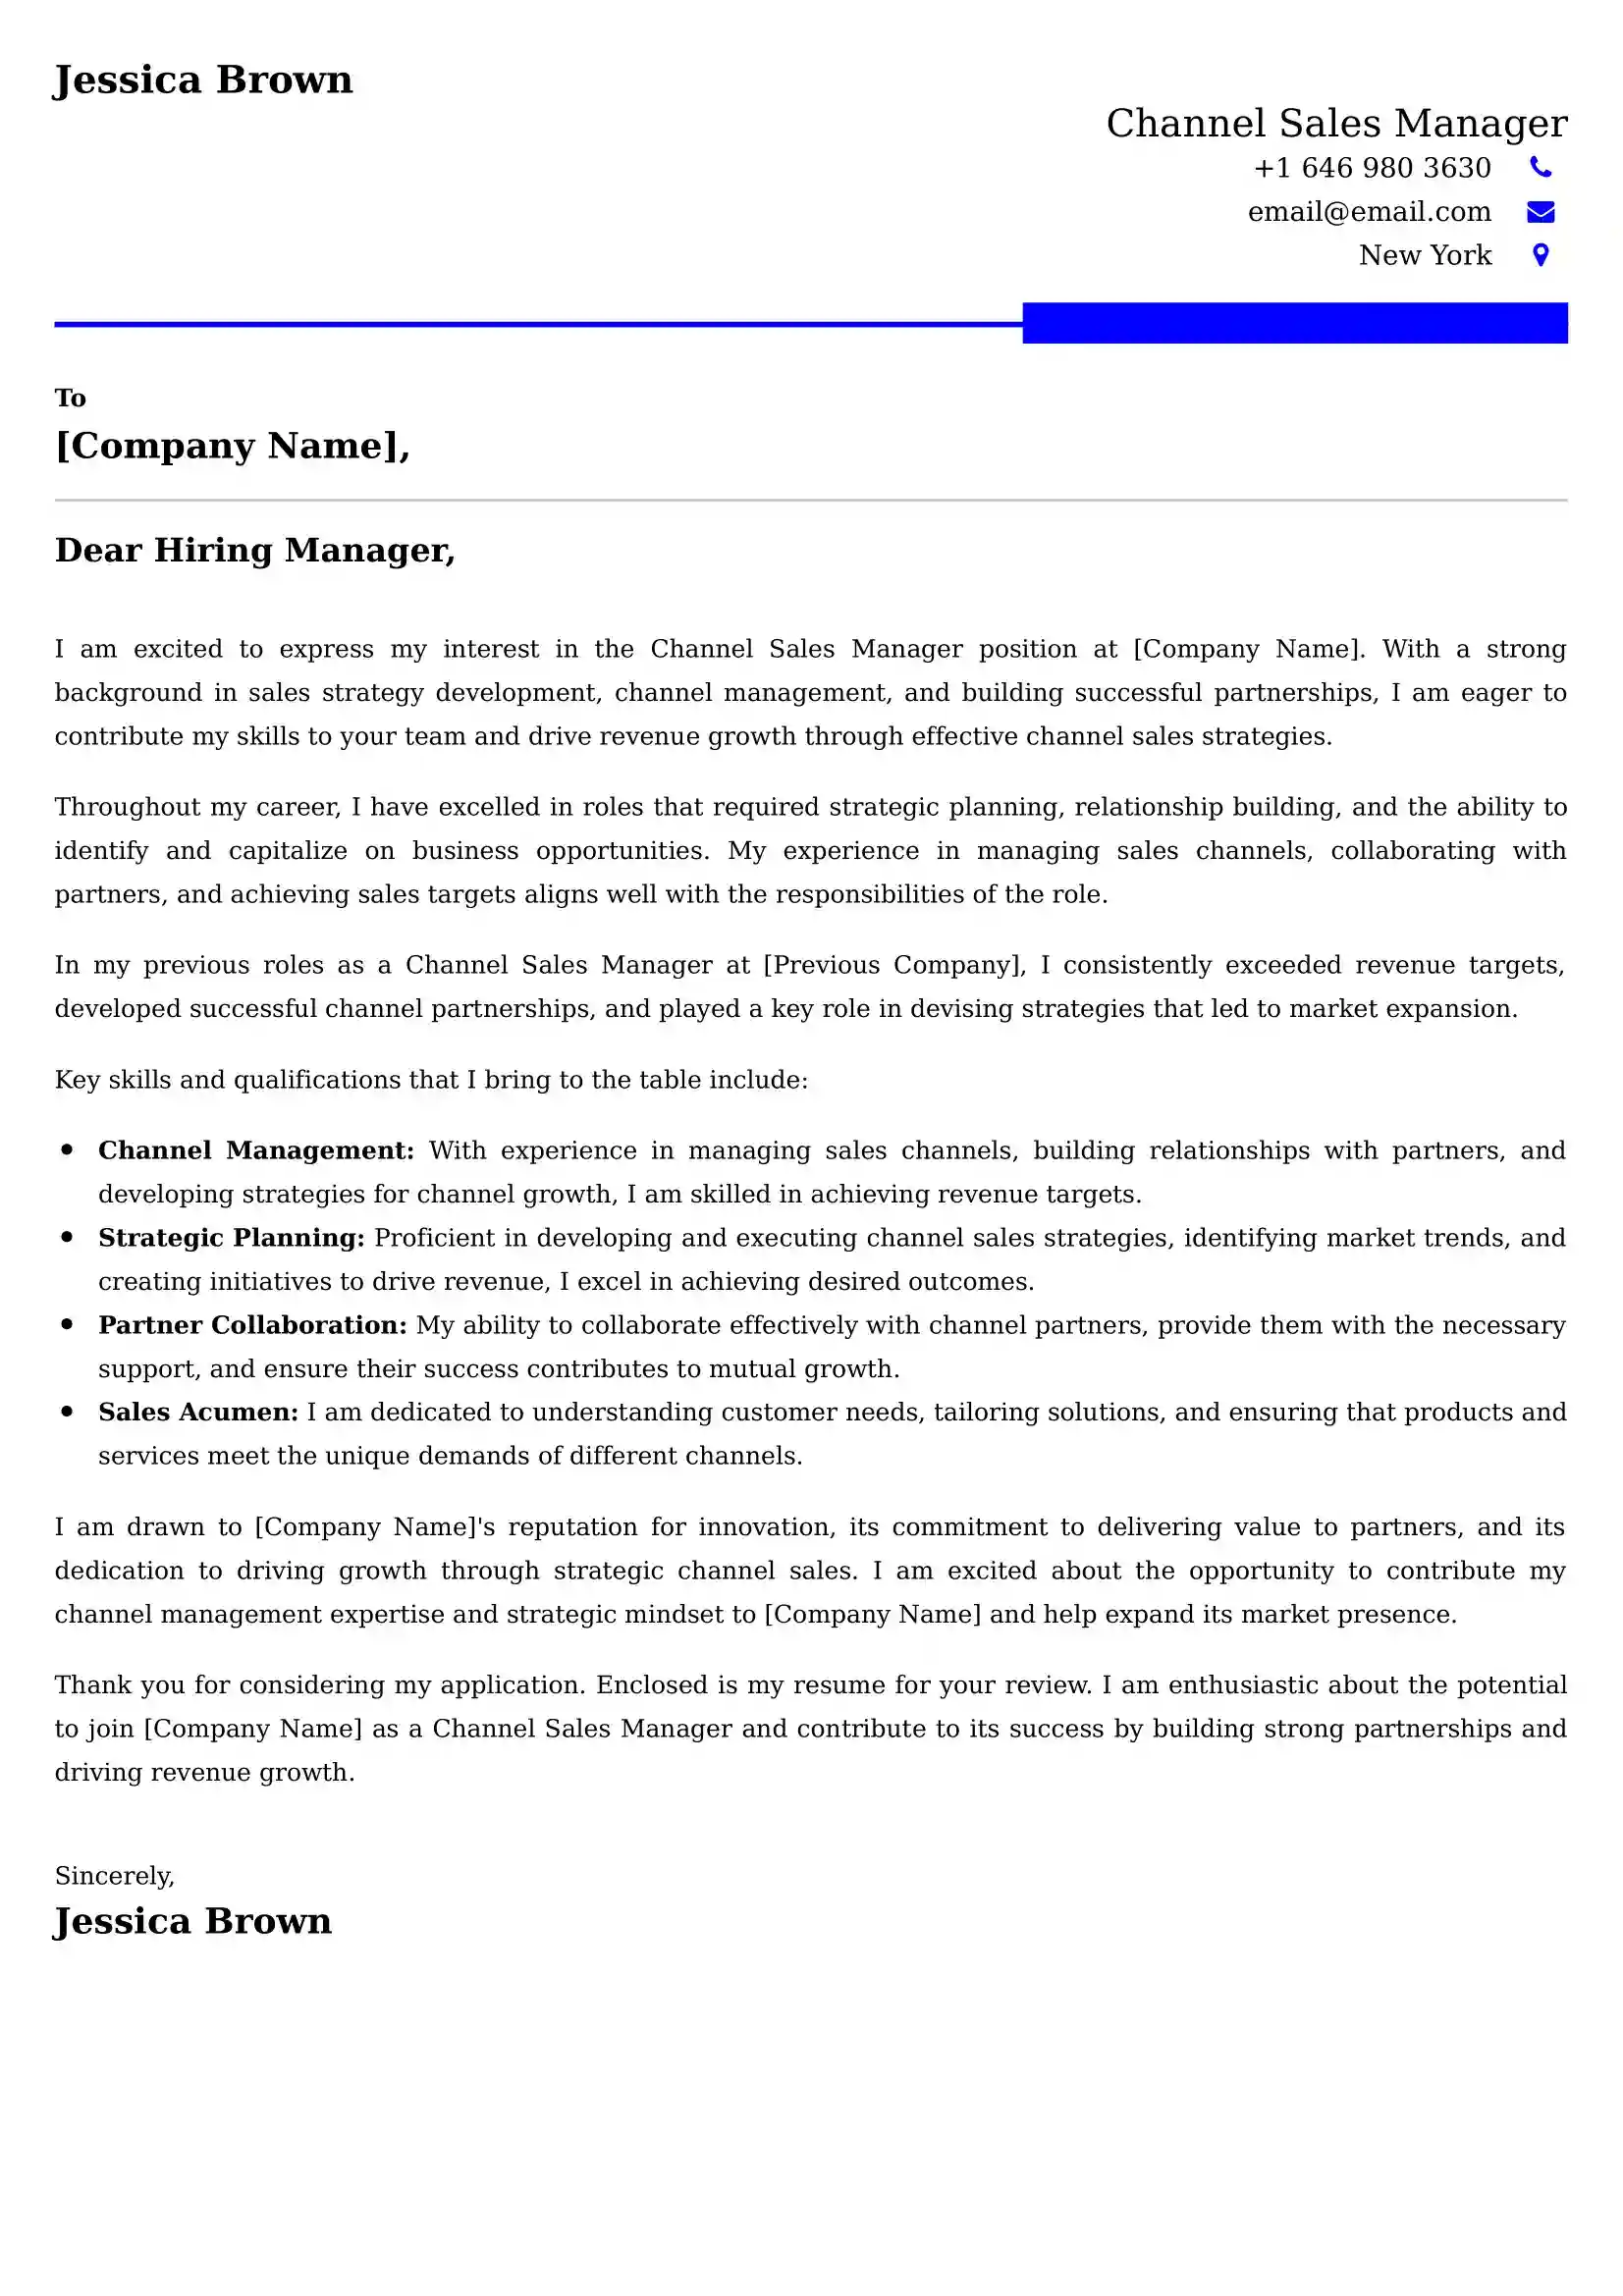 Channel Sales Manager Cover Letter Examples - Latest UK Format